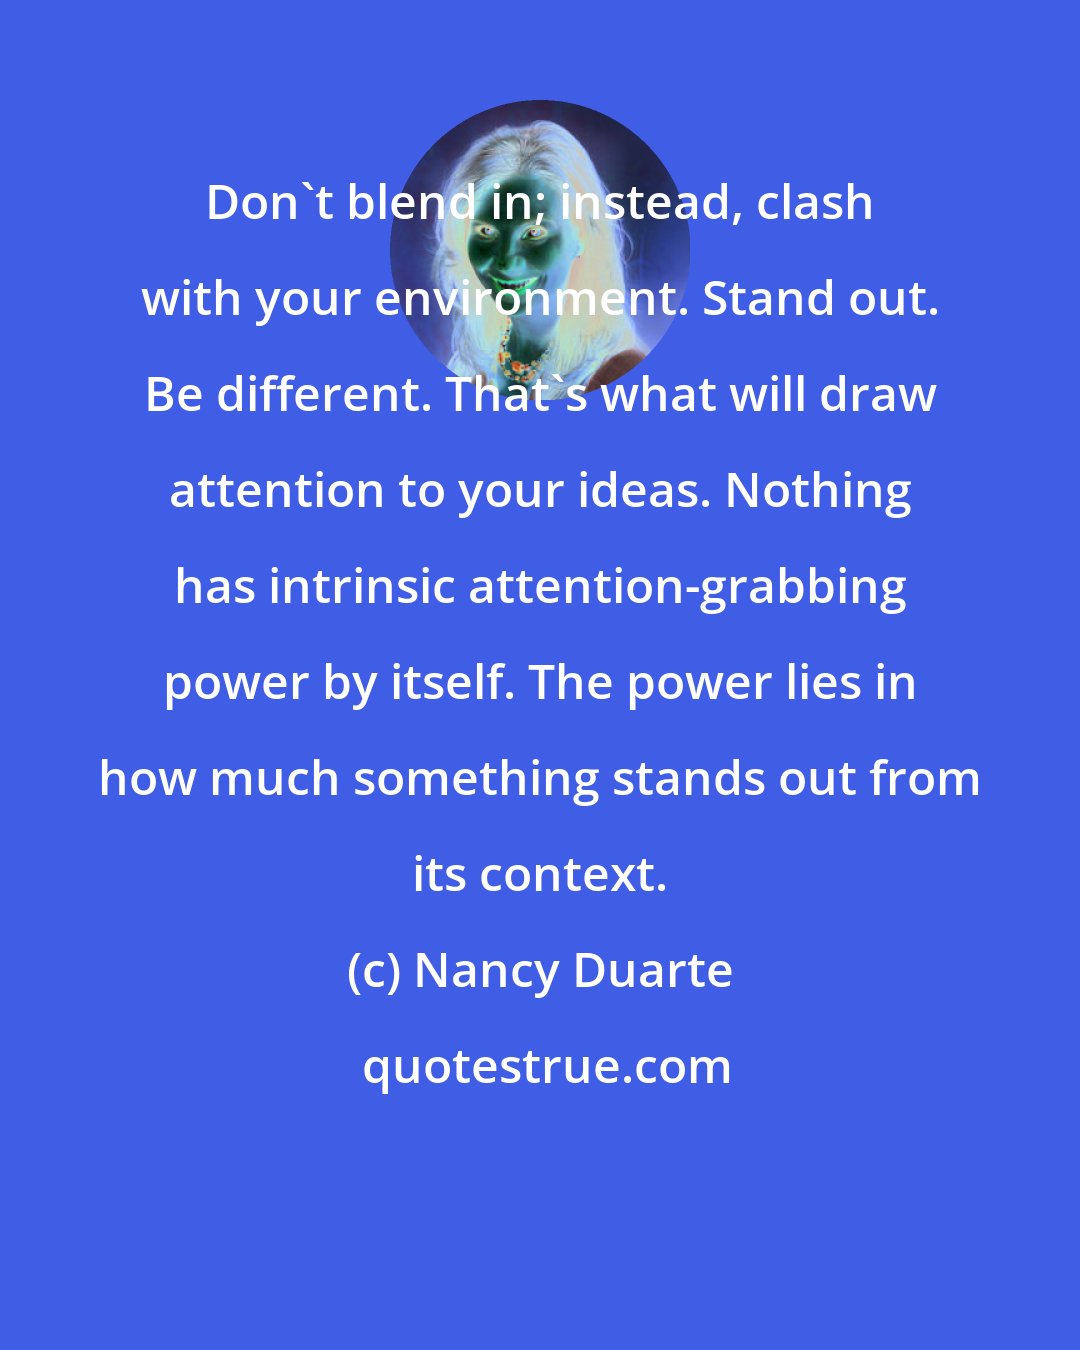 Nancy Duarte: Don't blend in; instead, clash with your environment. Stand out. Be different. That's what will draw attention to your ideas. Nothing has intrinsic attention-grabbing power by itself. The power lies in how much something stands out from its context.